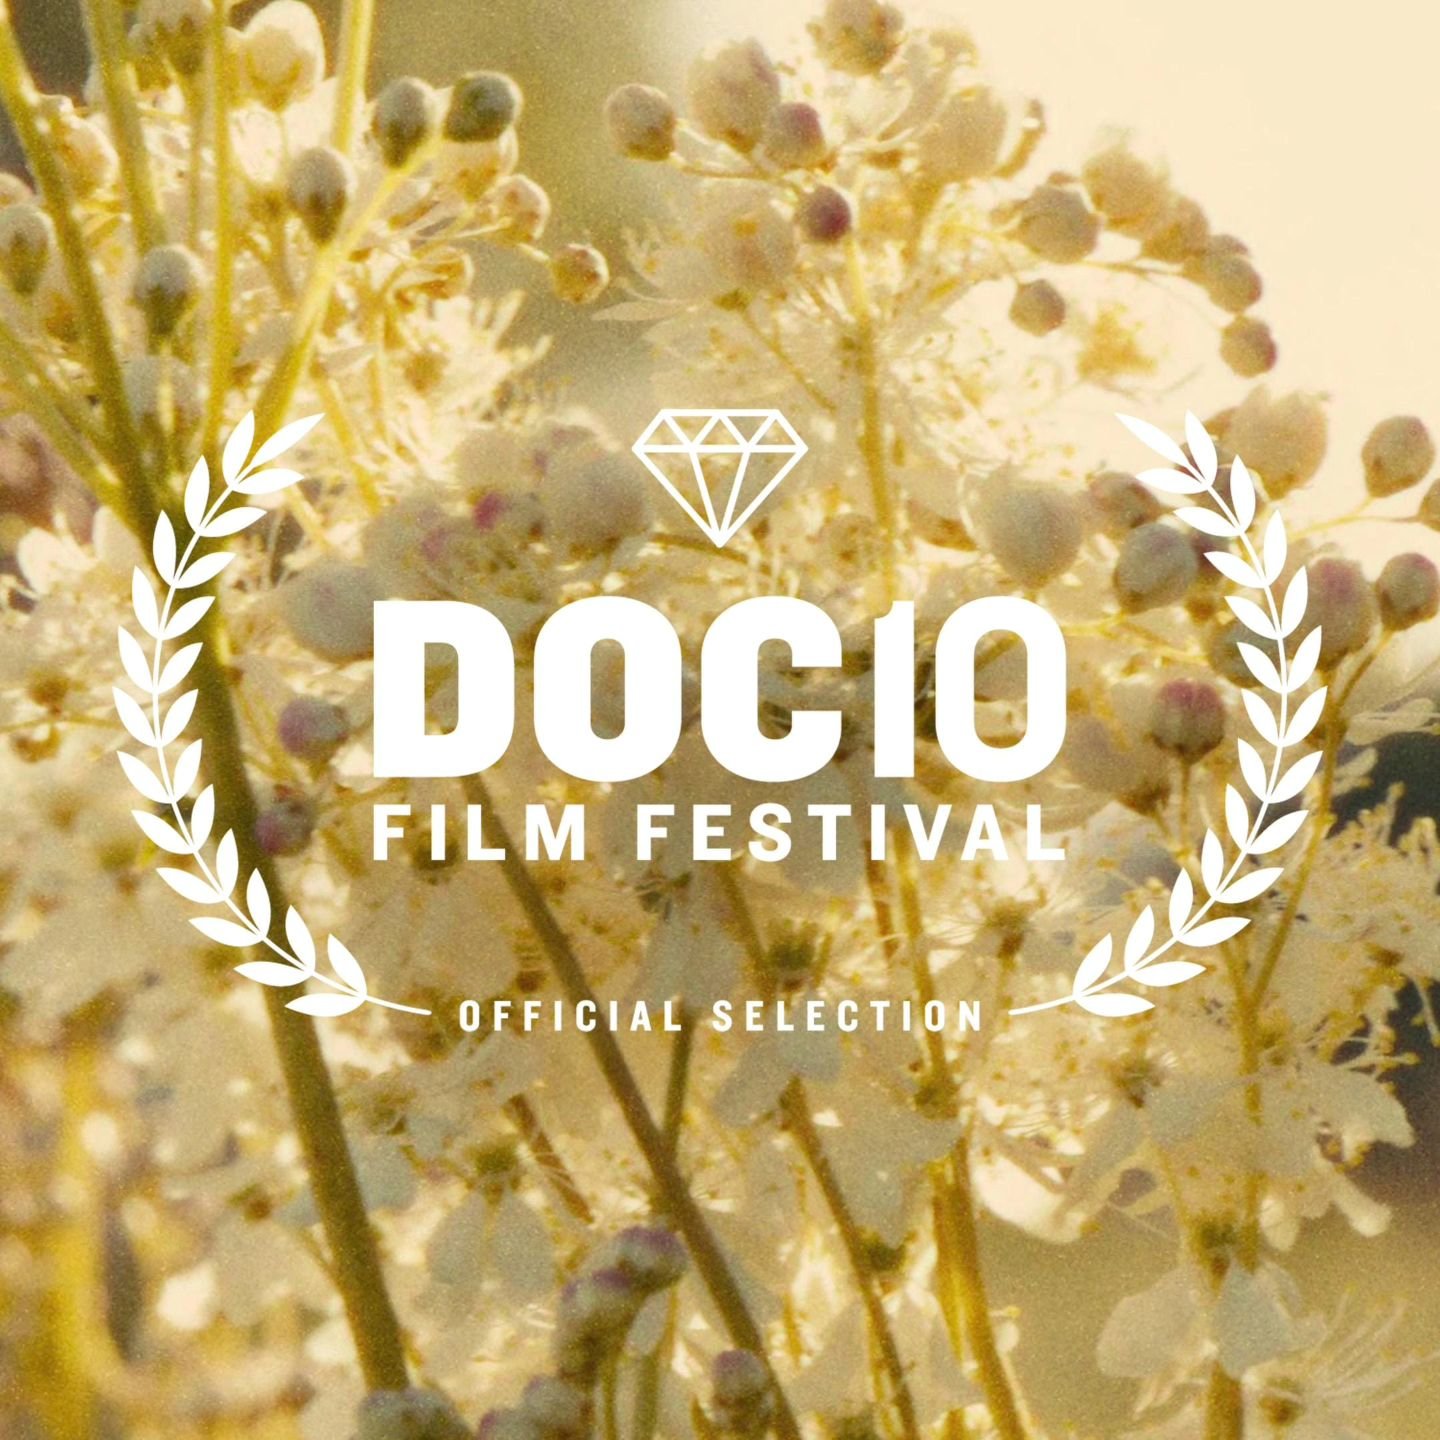 Porcelain War is premiering in Chicago at Doc10! The festival screens the best documentaries, culled from Sundance, Tribeca, Hot Docs, DOC NYC and other top-tier festivals across the nation.

We are truly honored. 

Screening:
Saturday May 4th @ 12:0